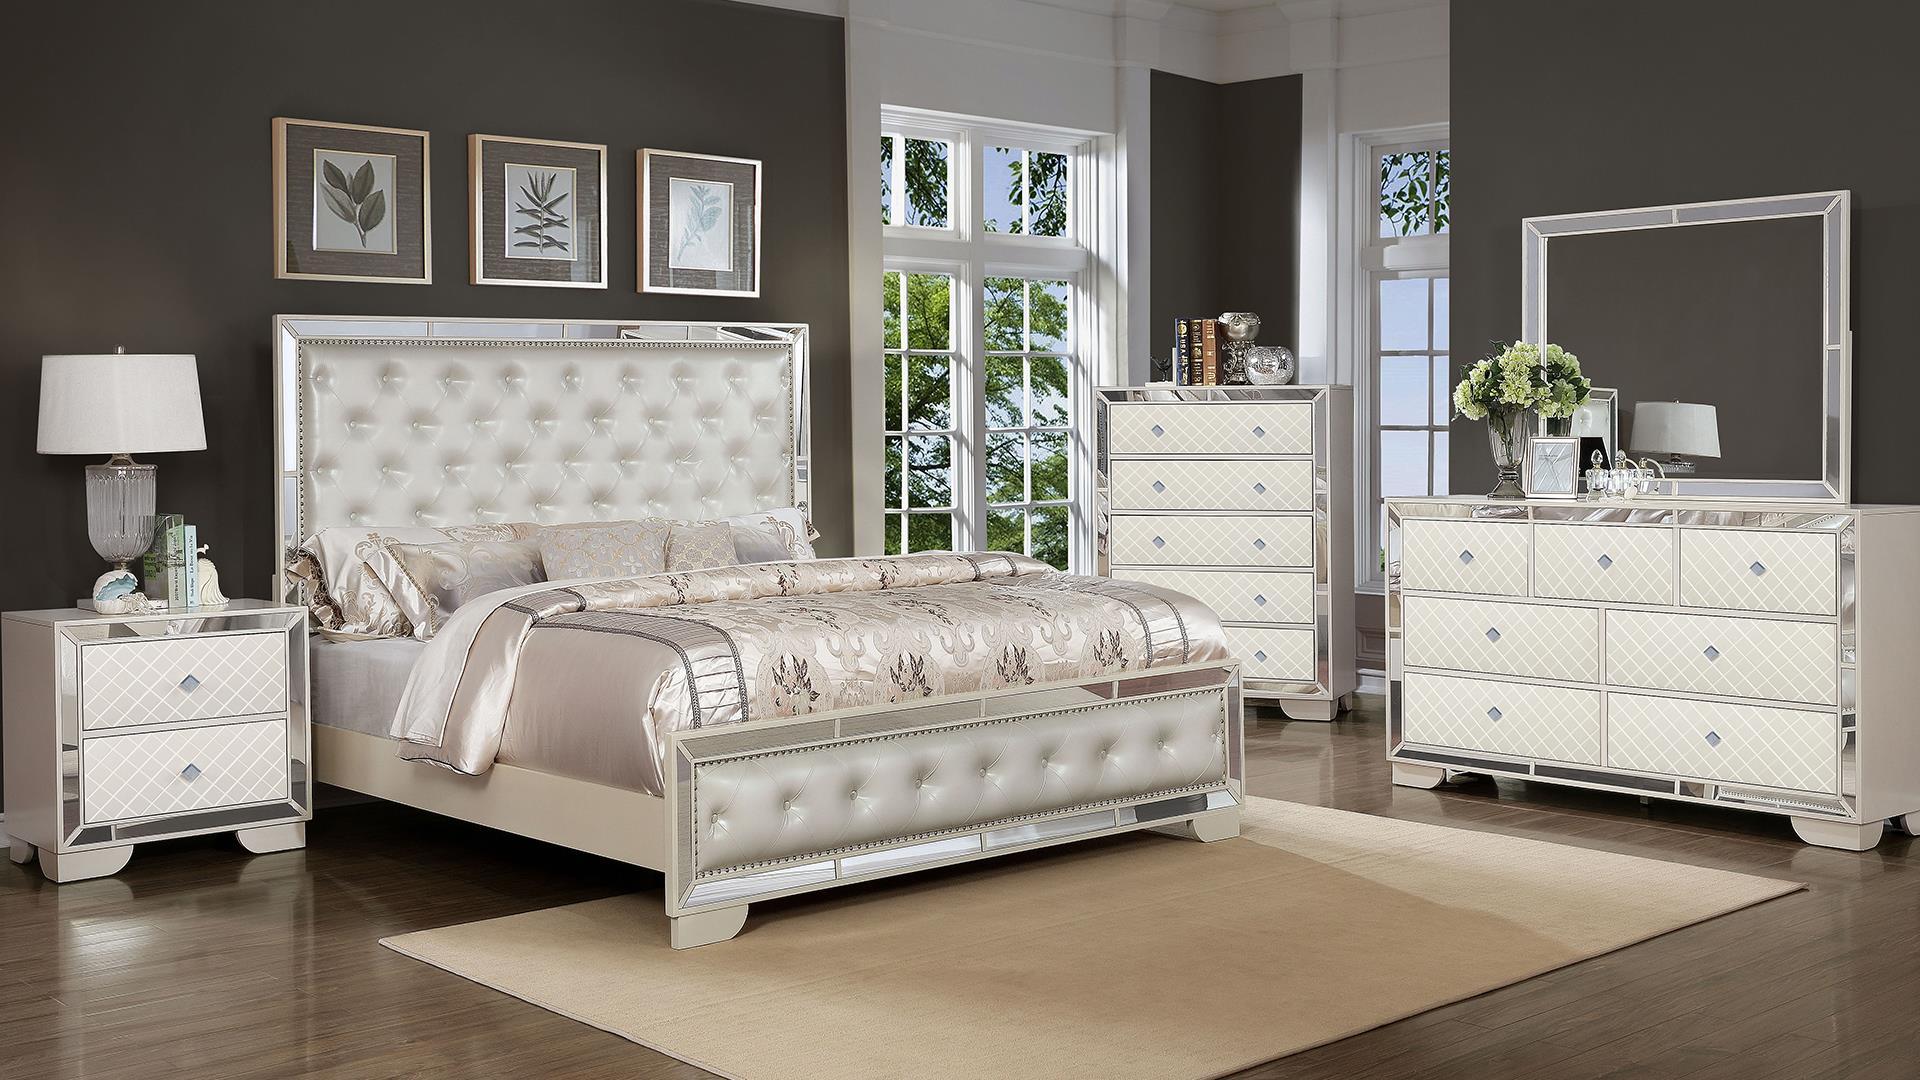 

    
Glam Beige Mirrored Inlay Tufted Queen Bed MADISON Galaxy Home Modern
